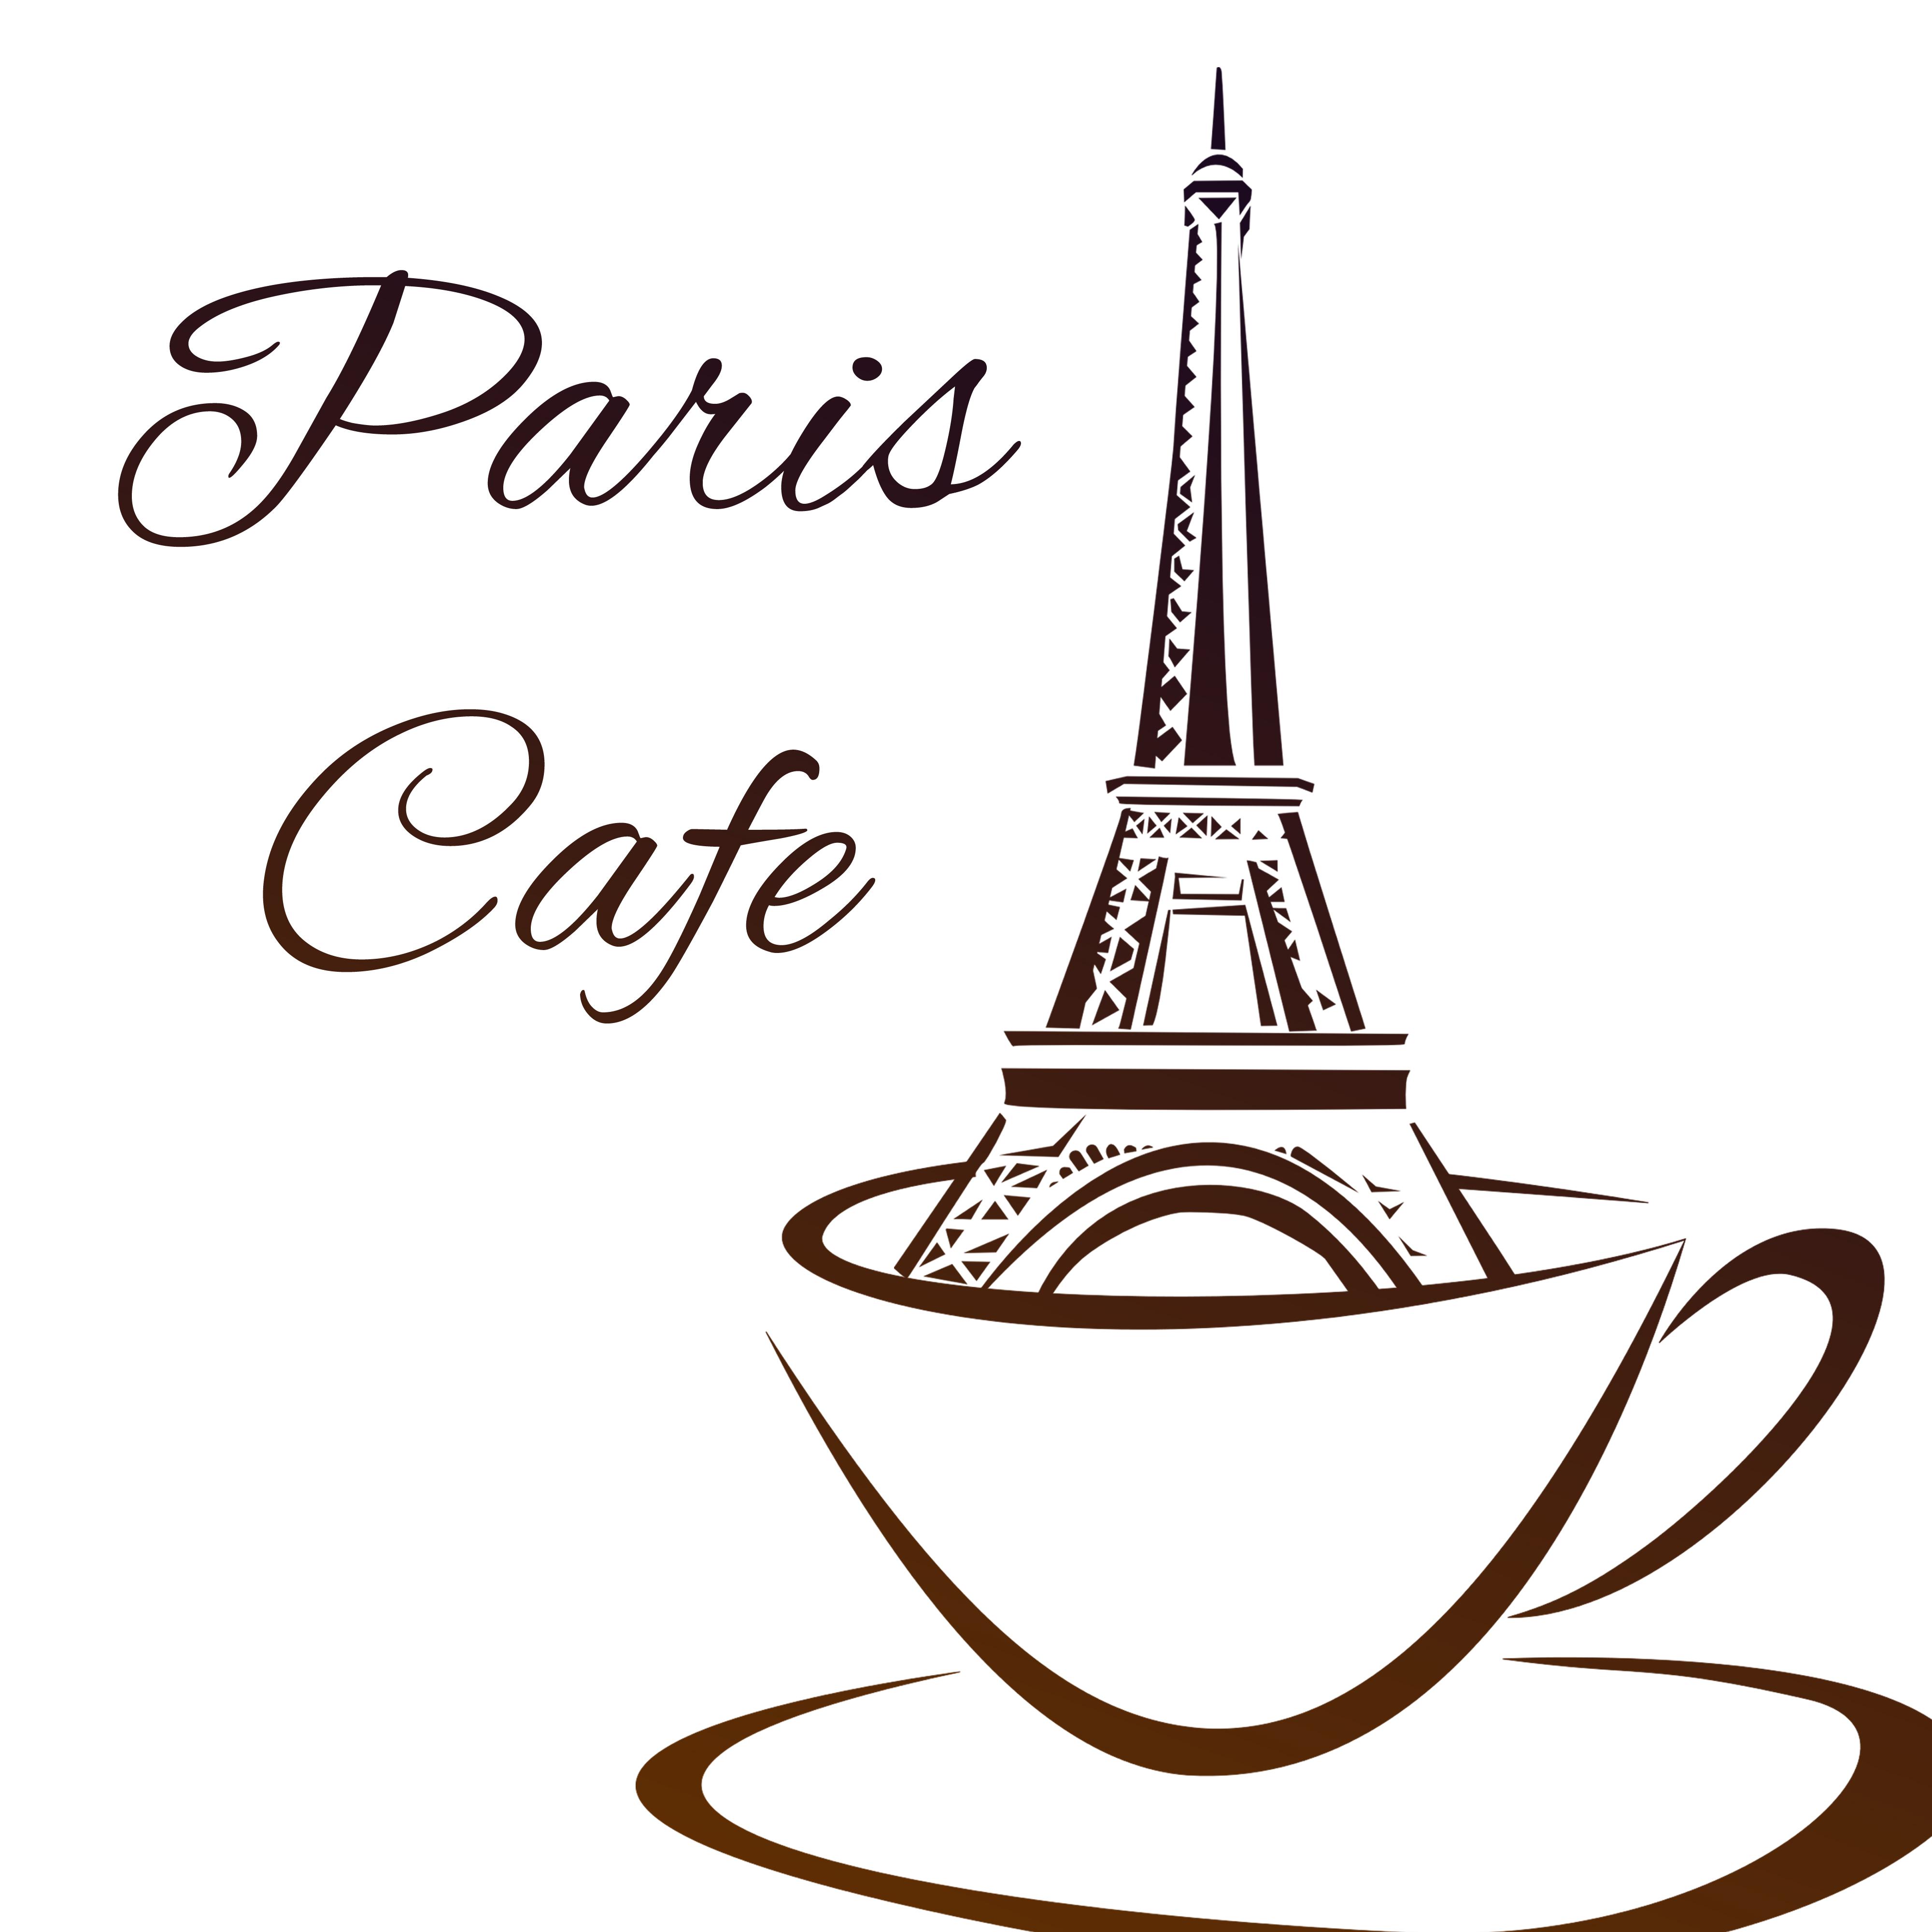 Paris Cafe  Relaxing Jazz Music, Coffee Talk, Good Mood, Jazz Cafe, Pure Rest with Family, Soft Sounds for Restaurant